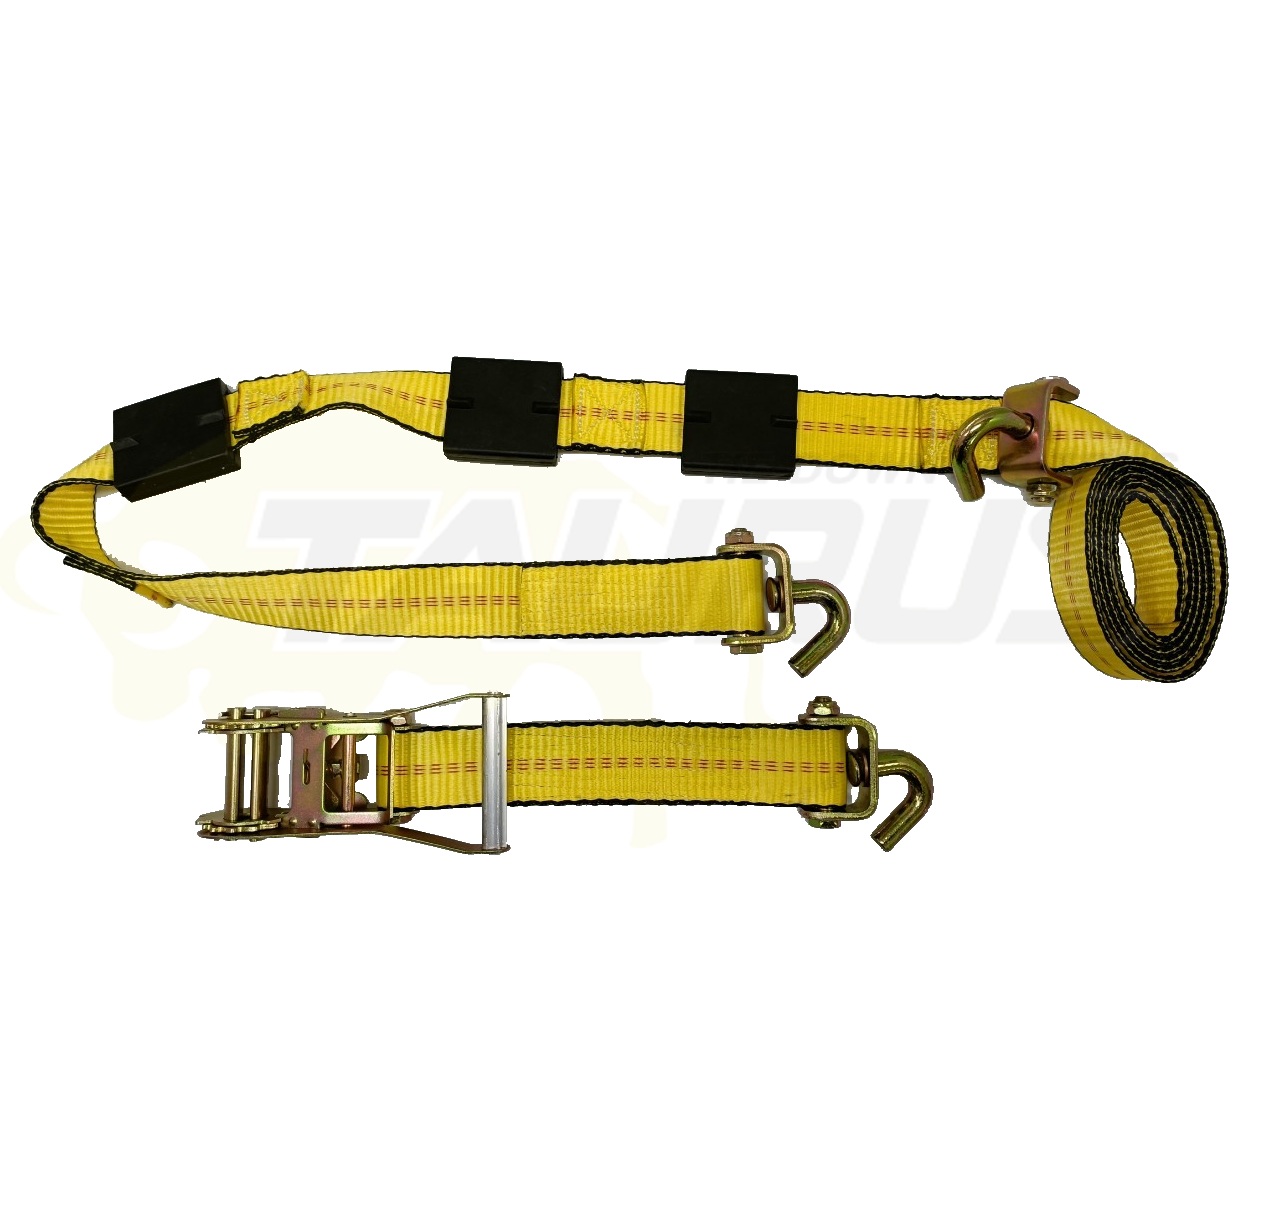 adjustable strap with hook, adjustable strap with hook Suppliers and  Manufacturers at